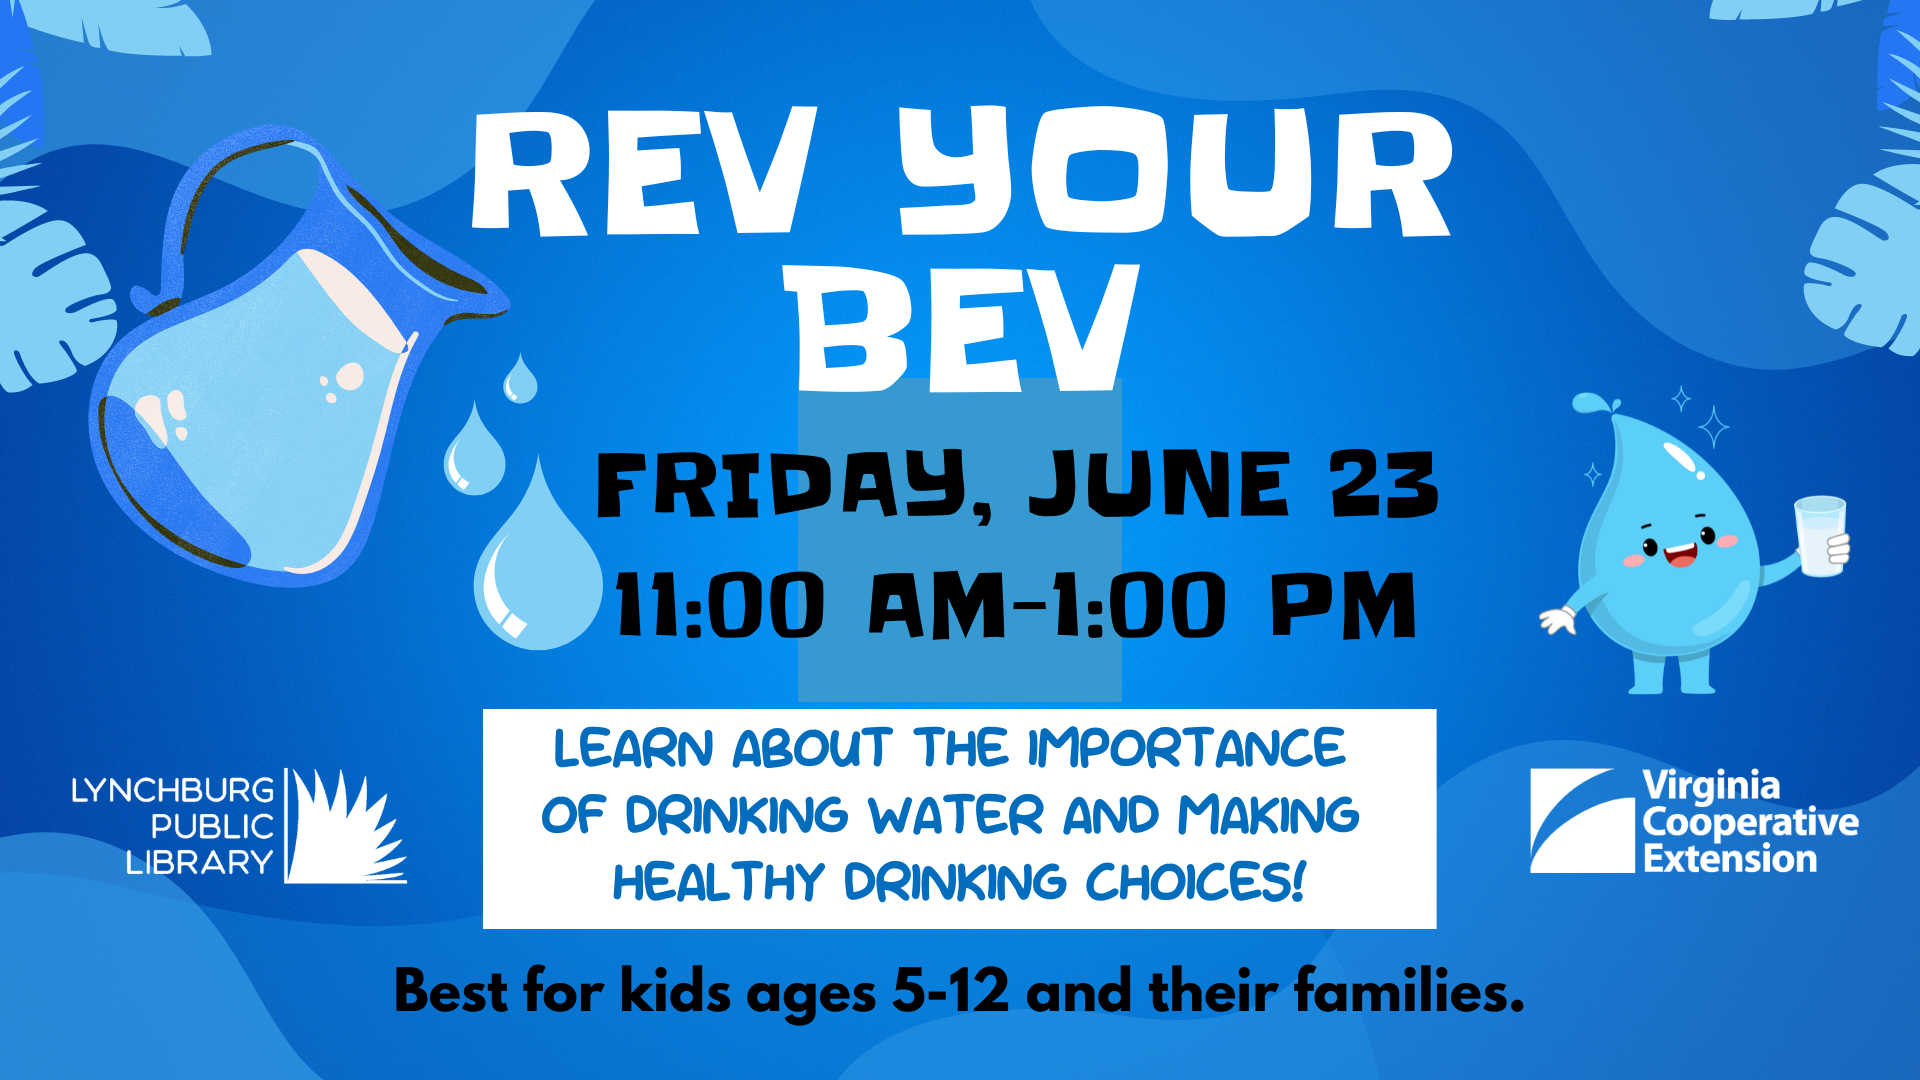 Rev Your Bev on Friday June 23 from 11am to 1pm. Learn about the importance of drinking water and making healthy drinking choices. Best for kids ages 5 to 12 and their families. 